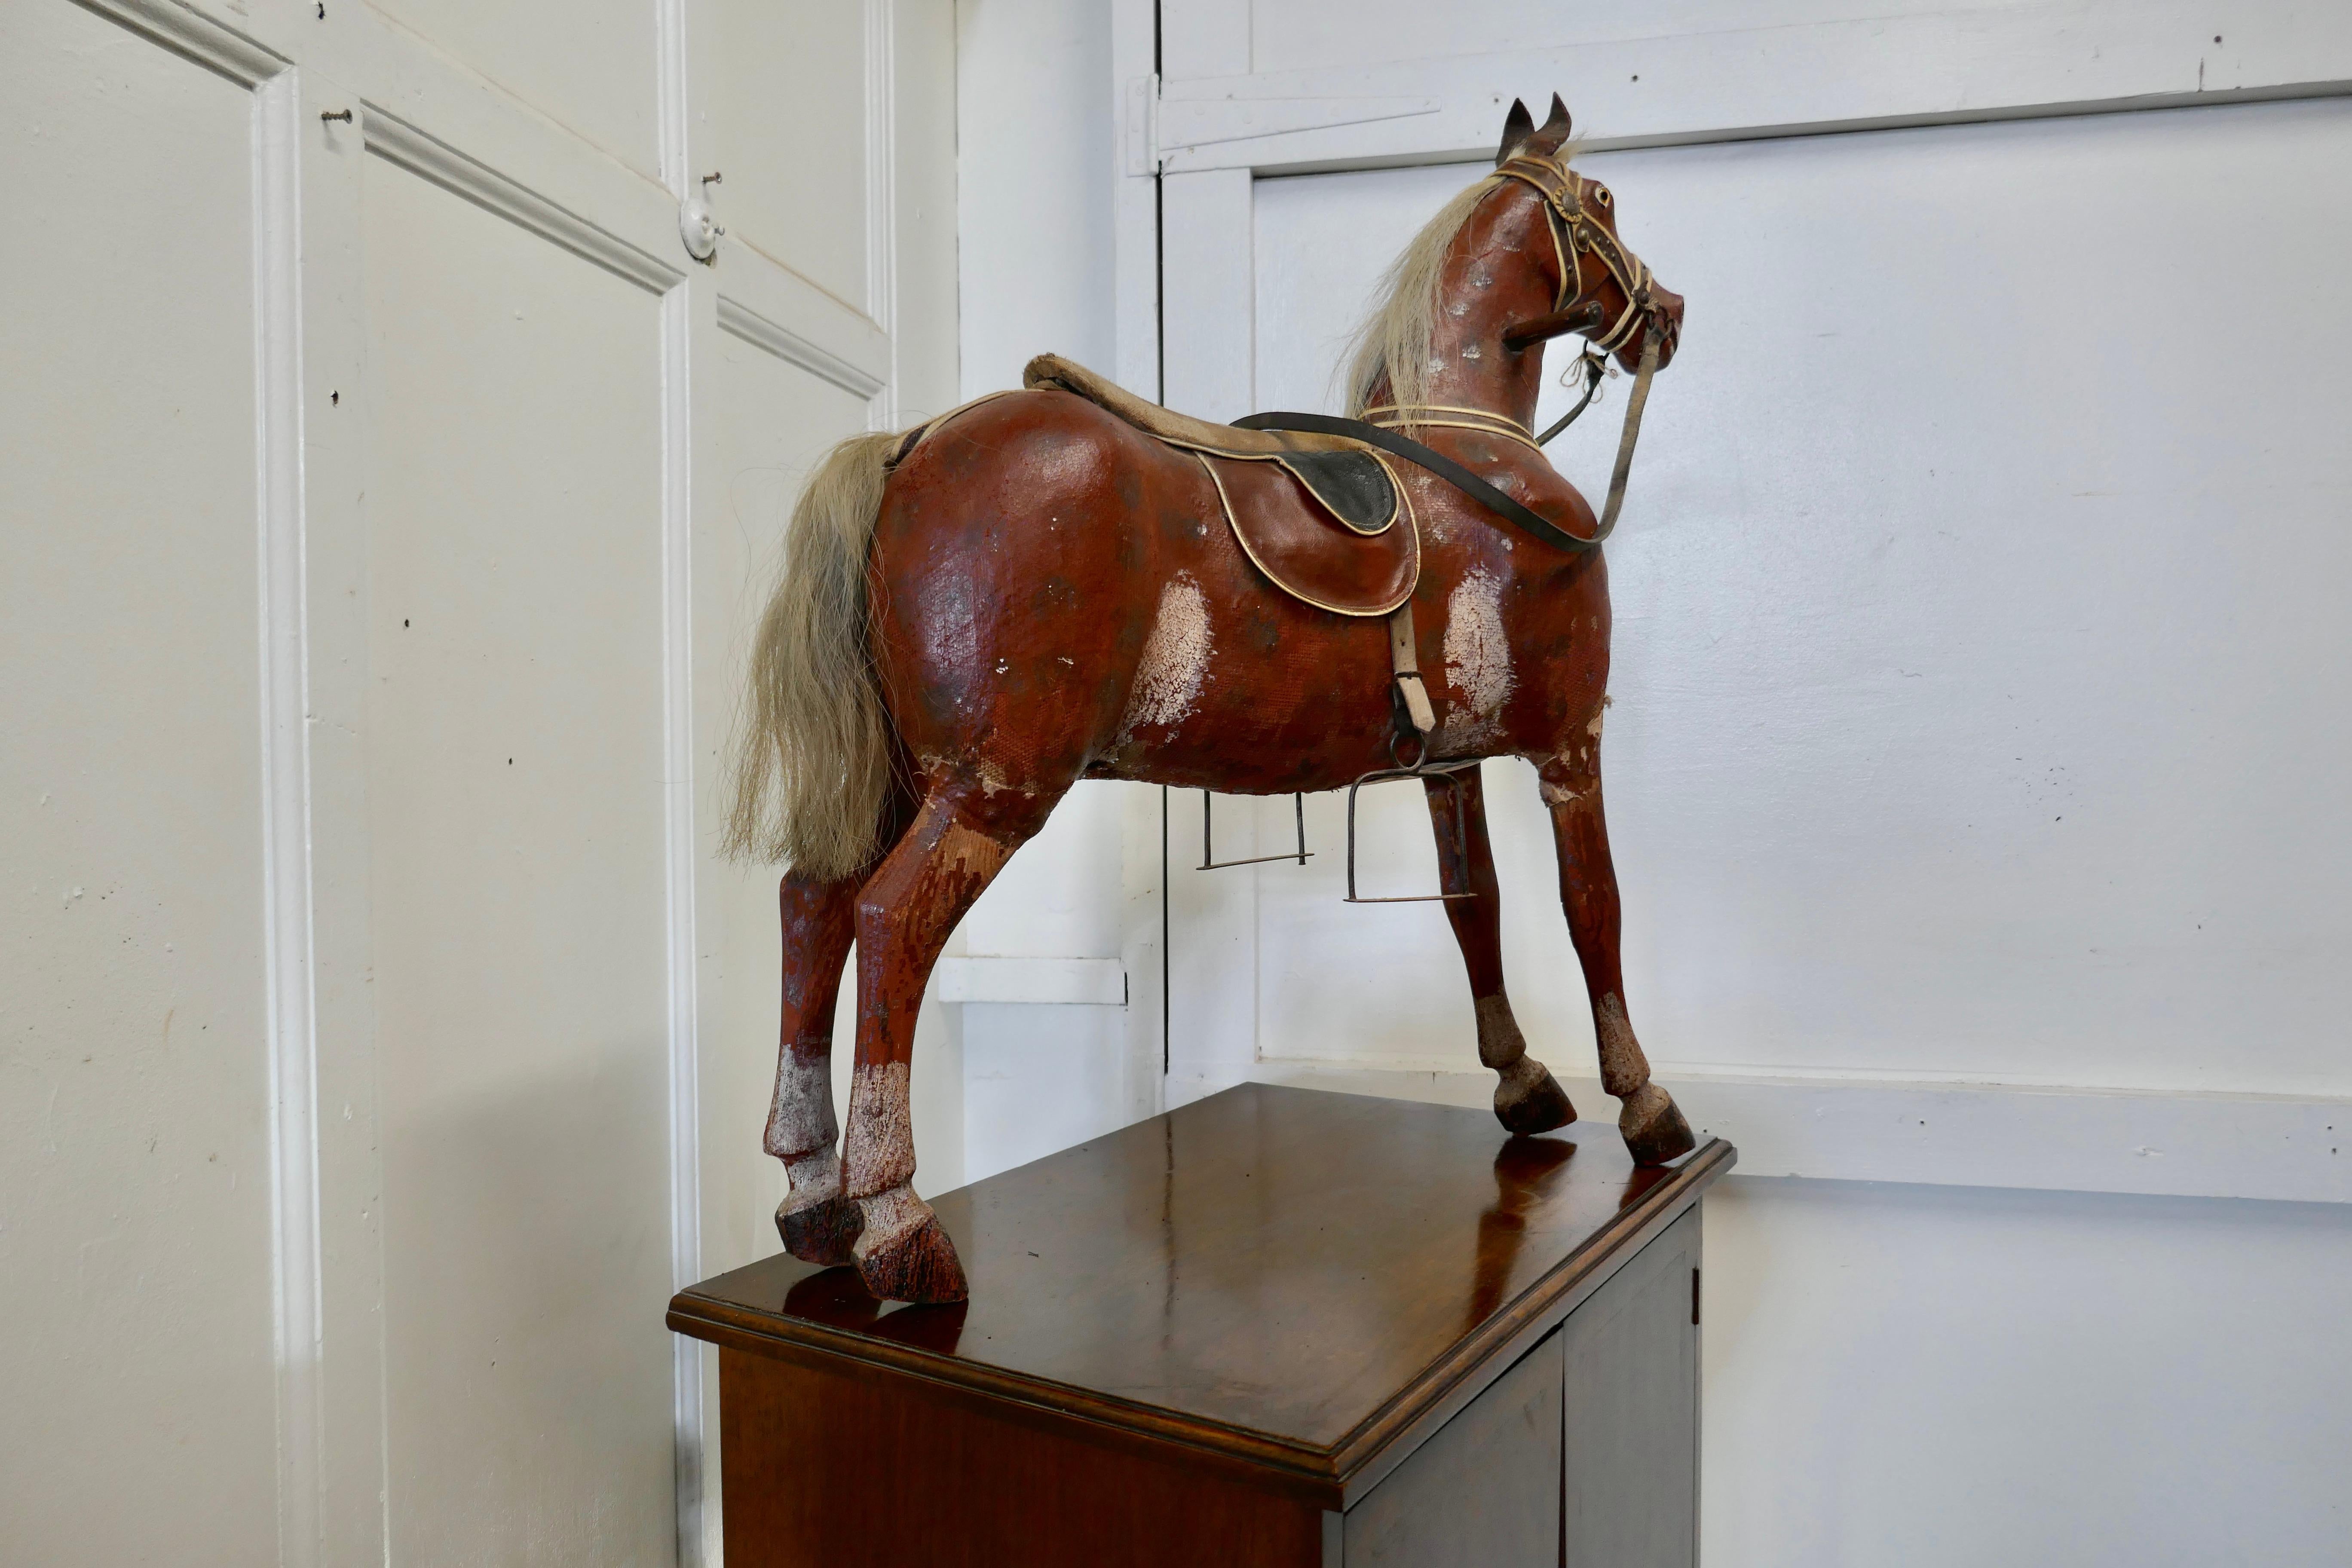 Folk Art Arts & Crafts Canvas Toy Model of a Horse For Sale